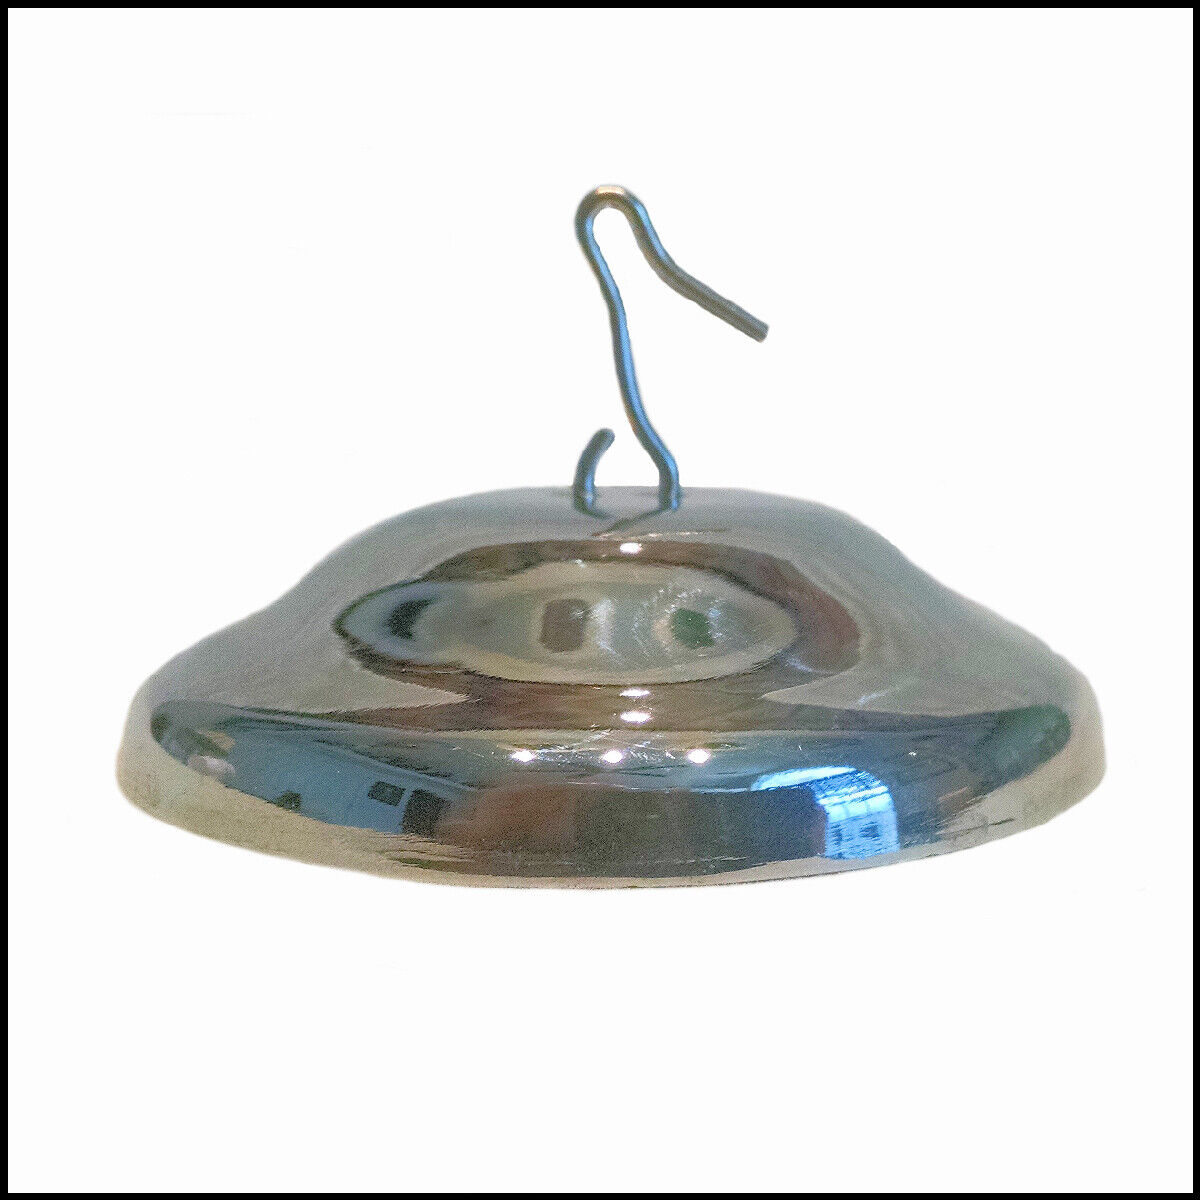 NEW ALADDIN LAMP STYLE NICKEL SMOKE BELL WITH HOOK for ALADDIN HANGING LAMPS